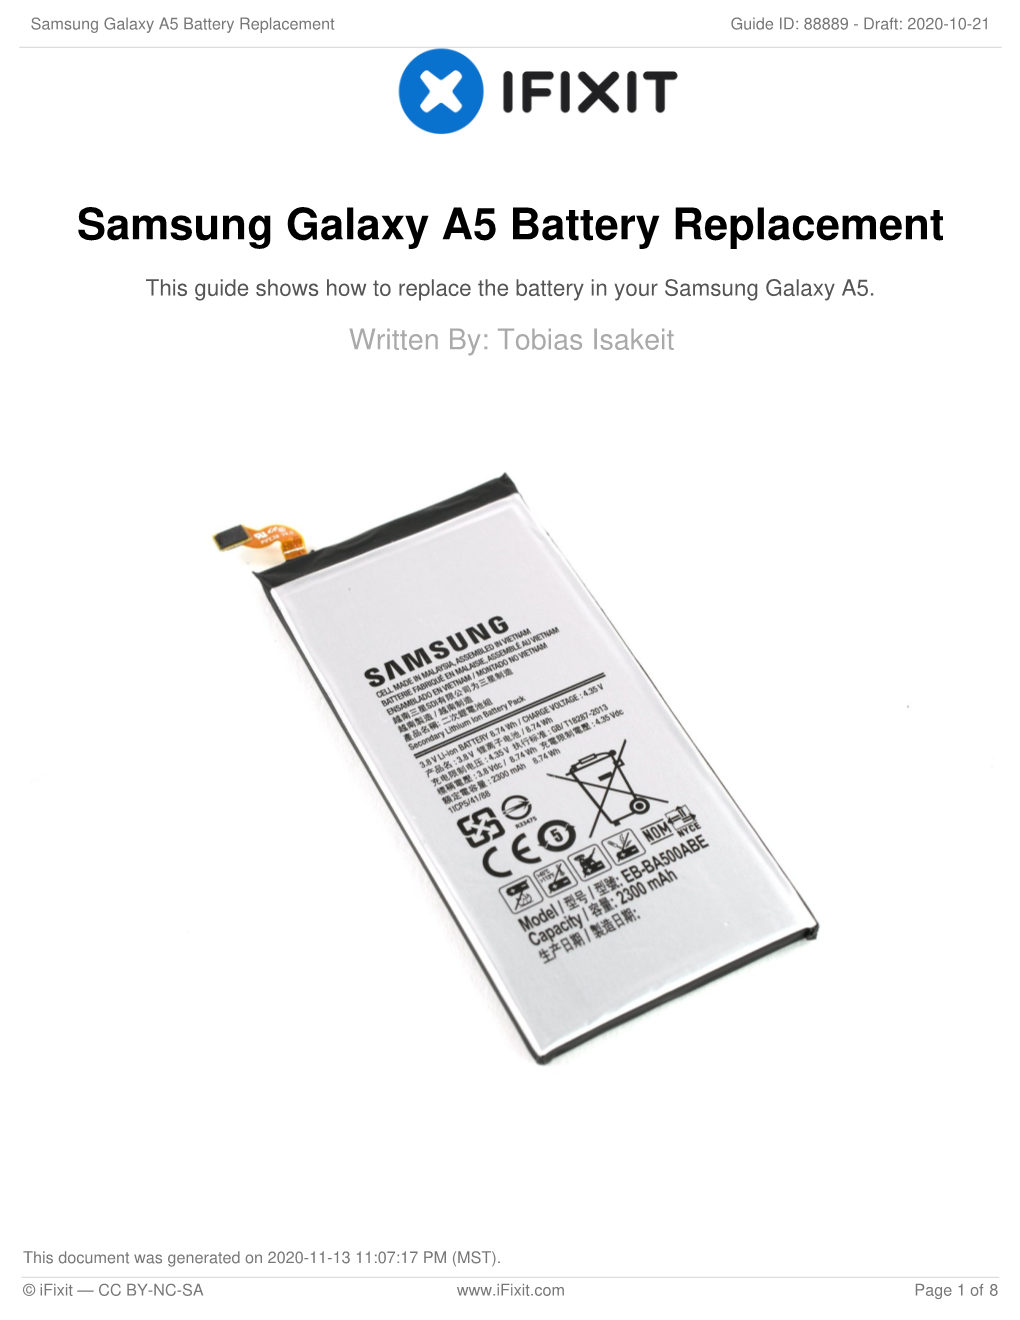 Samsung Galaxy A5 Battery Replacement Guide ID: 88889 - Draft: 2020-10-21